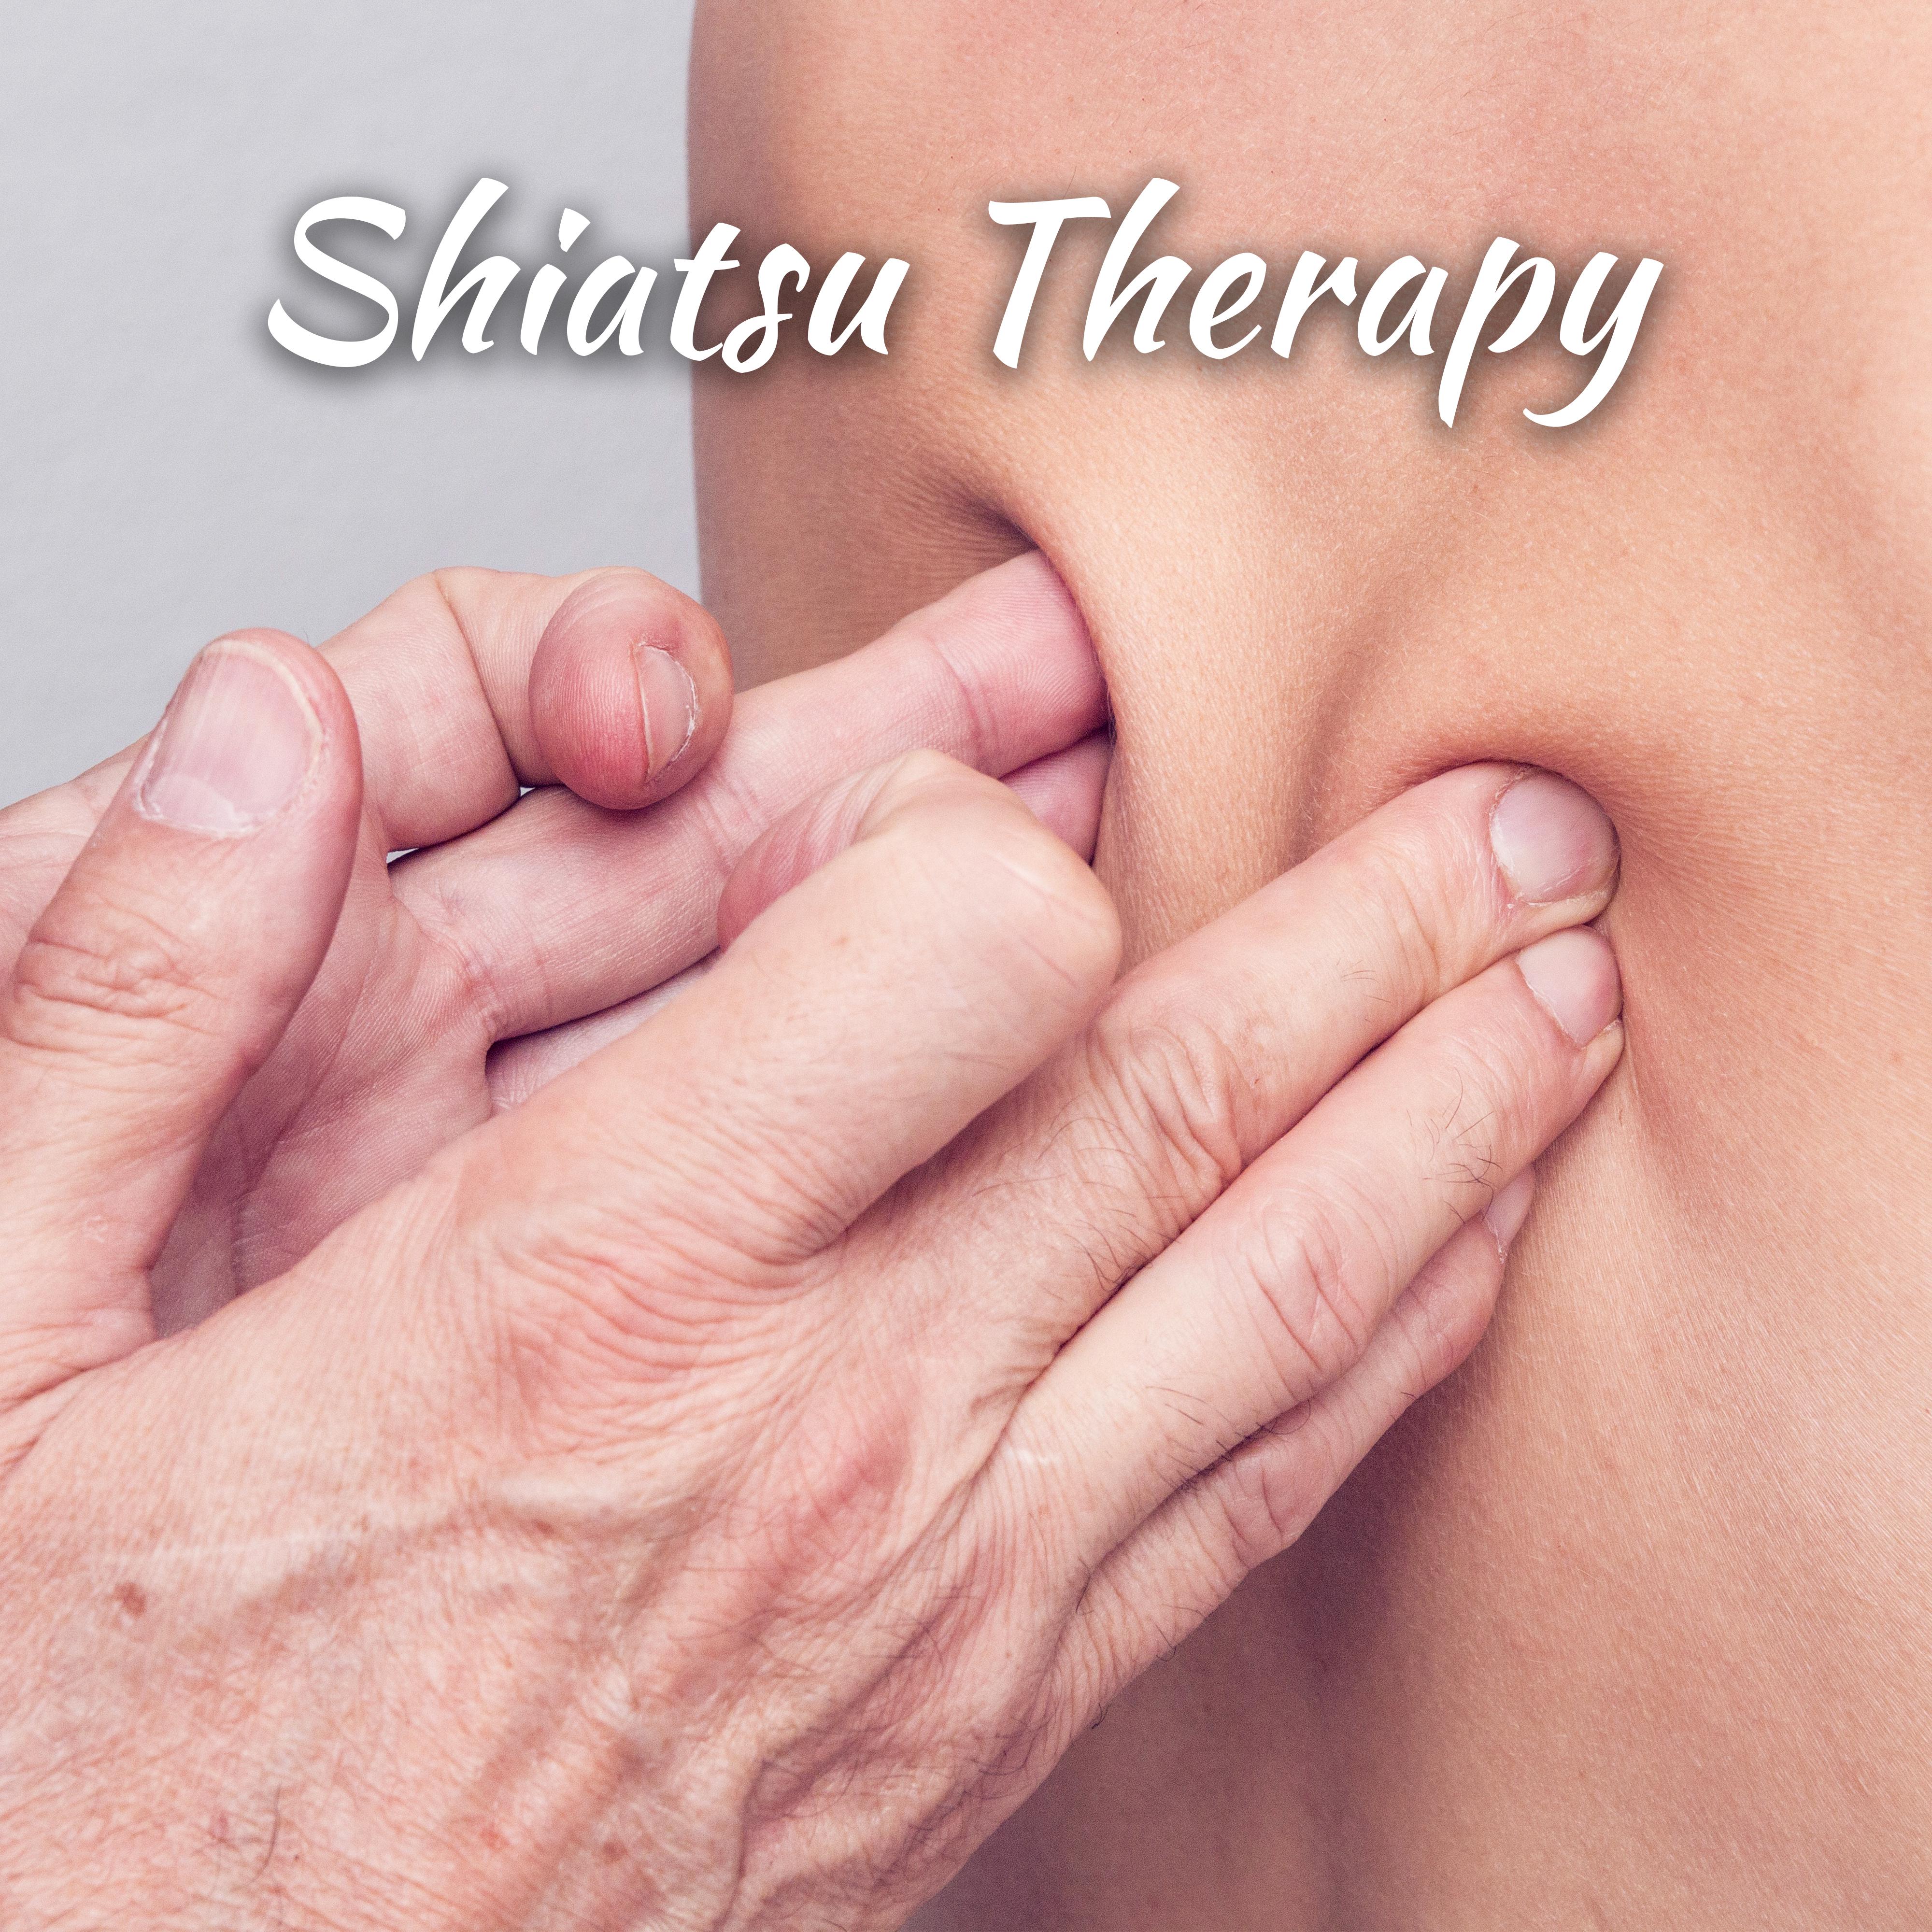 Shiatsu Therapy – New Age, Music for Massage Therapy, Spa, Wellness Relaxation